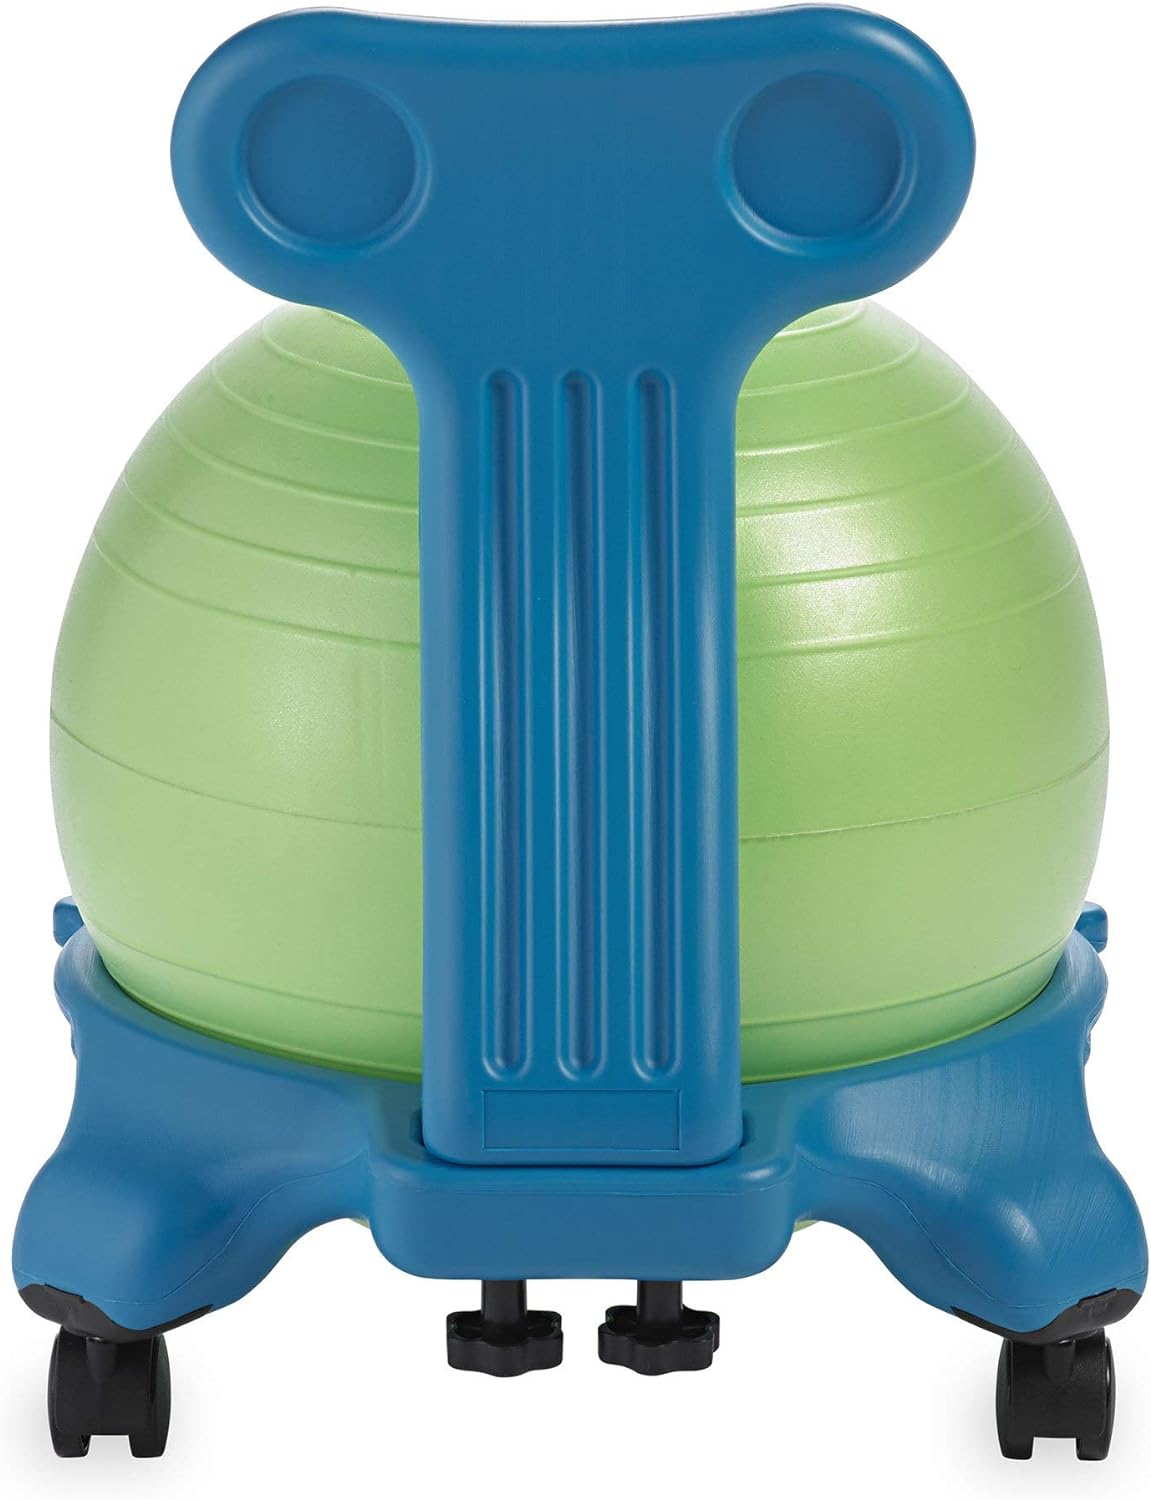 Gaiam Kids Balance Ball Chair - Classic Children's Stability Ball Chair, Alternative School Classroom Flexible Desk Seating for Active Students with Satisfaction Guarantee, Blue/Green